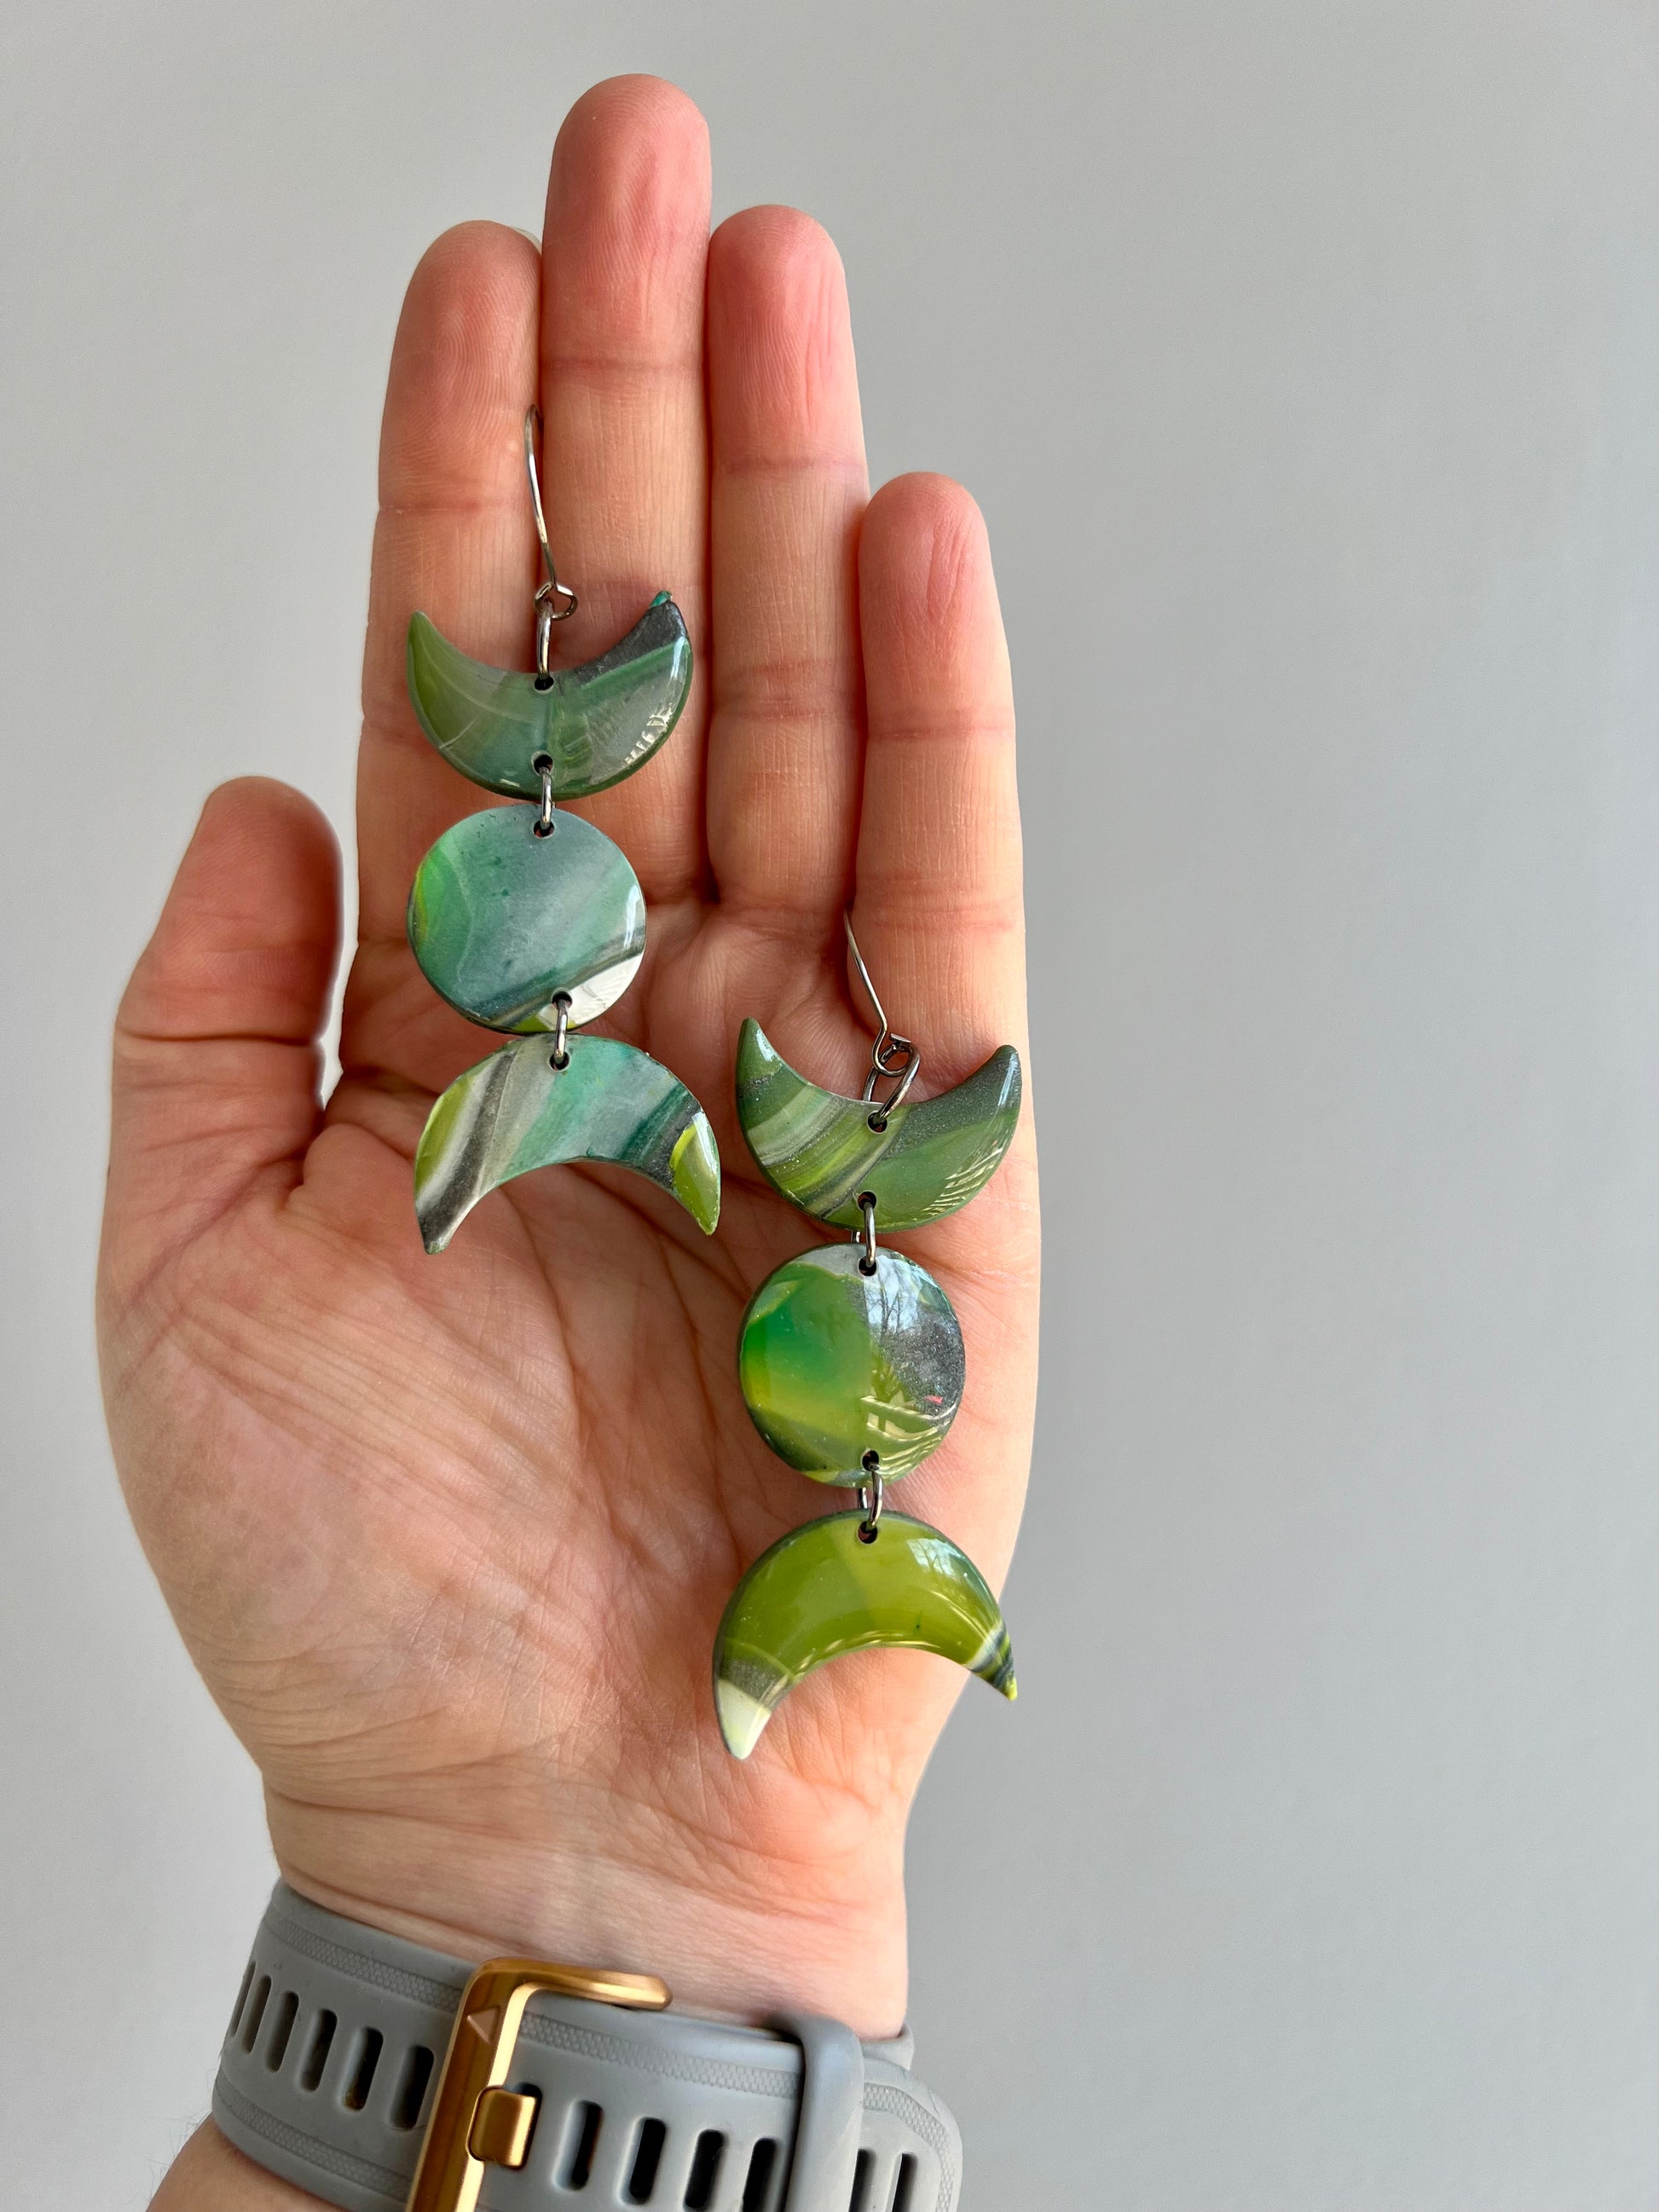 Discover the energy of the earth with our unique polymer clay earrings. Handmade from shades of green, silver, and white, each pair symbolizes rebirth and immortality, bringing a touch of nature's vitality to your style.